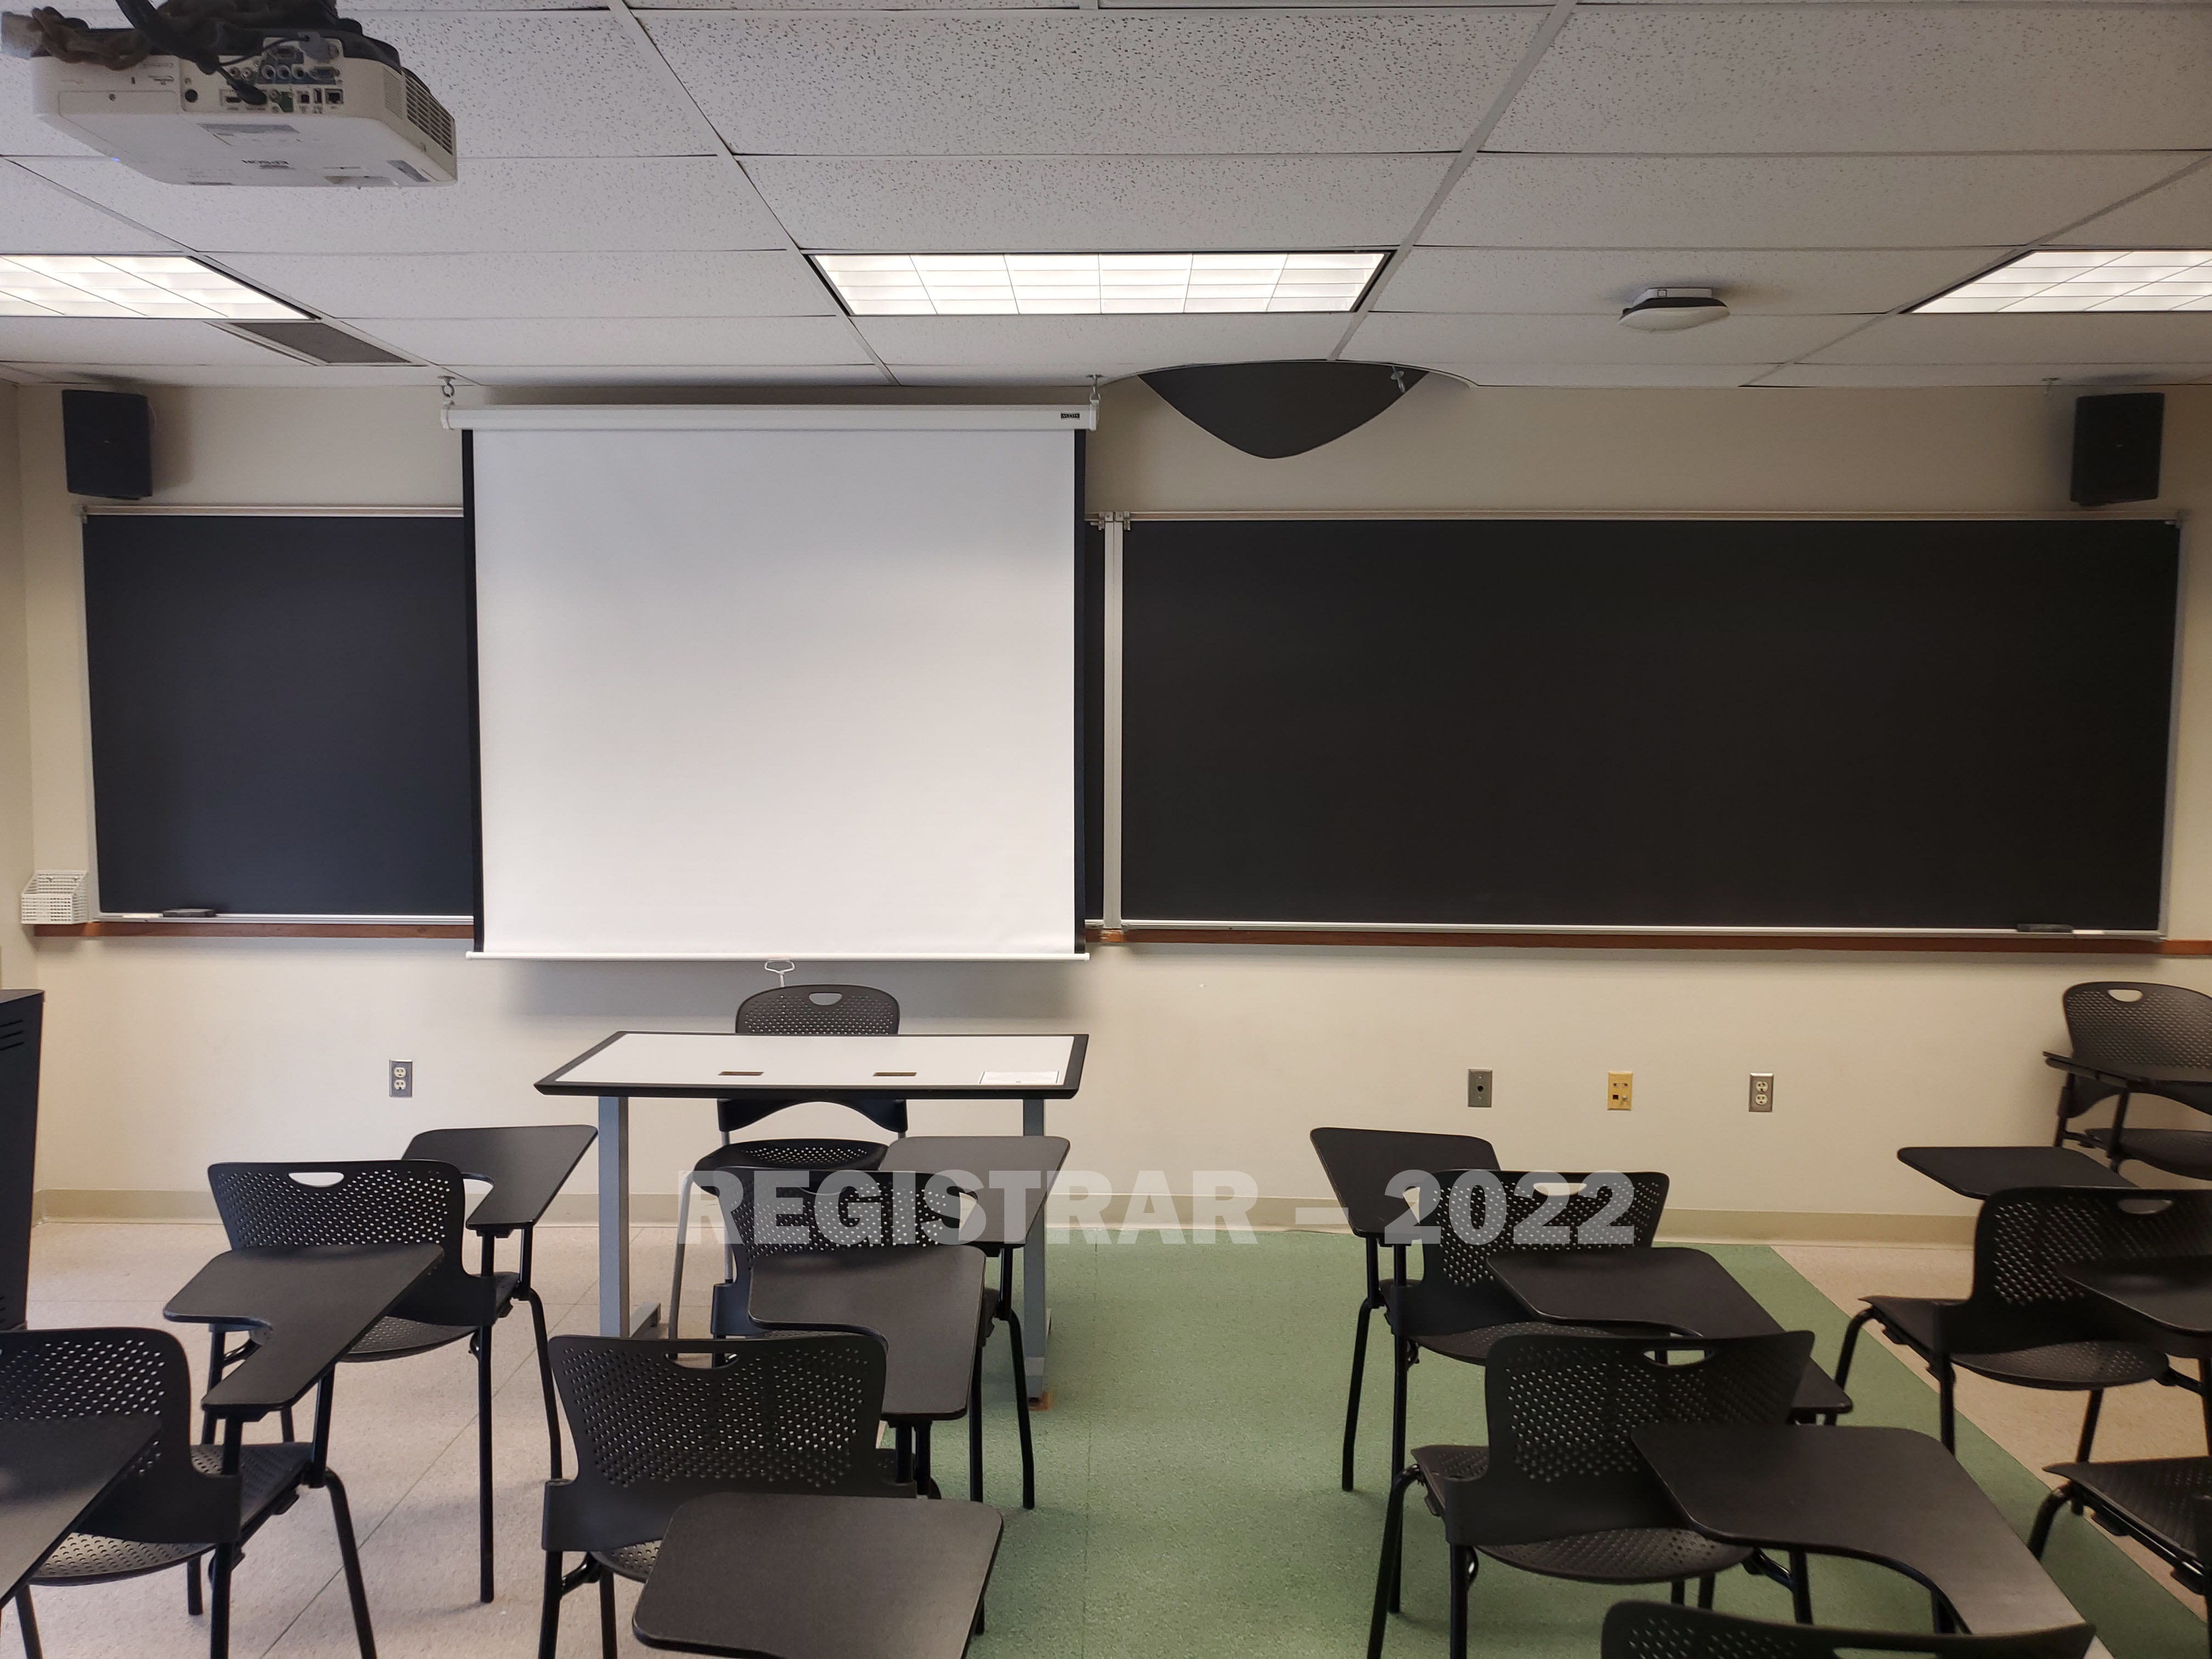 Enarson Classroom Building room 346 view from the back of the room with projector screen down